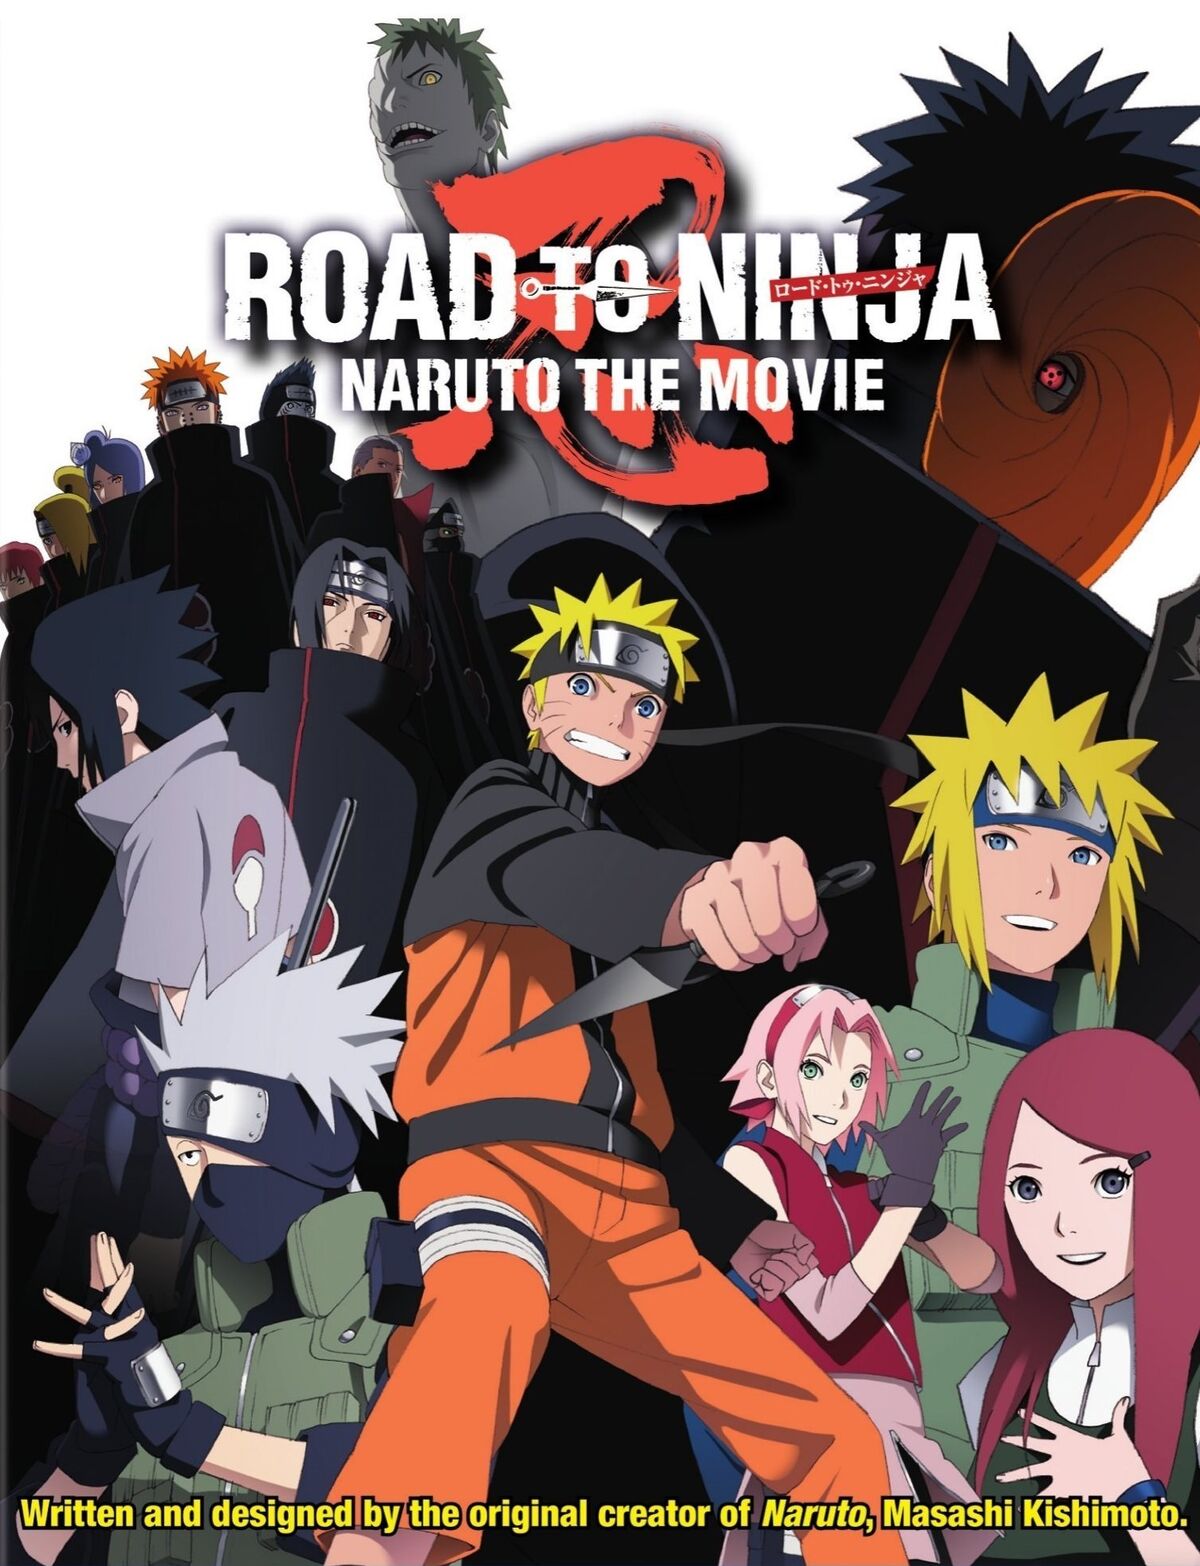 Road to Ninja - Naruto the Movie Event Official Trailer